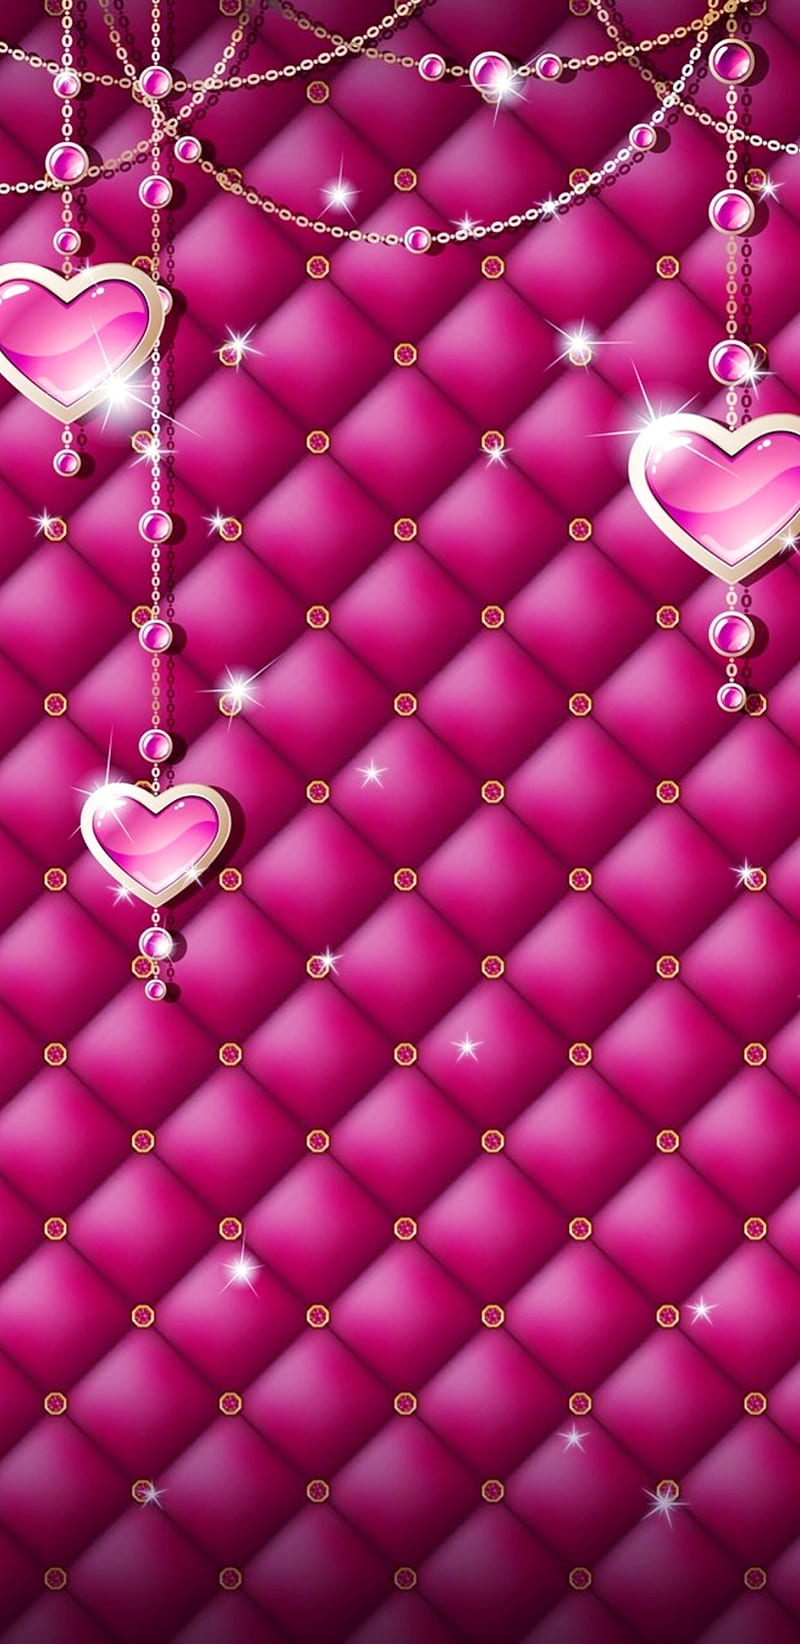 Charming Hearts, chains, girly, gold, heart, padded, pink, pretty, HD phone wallpaper